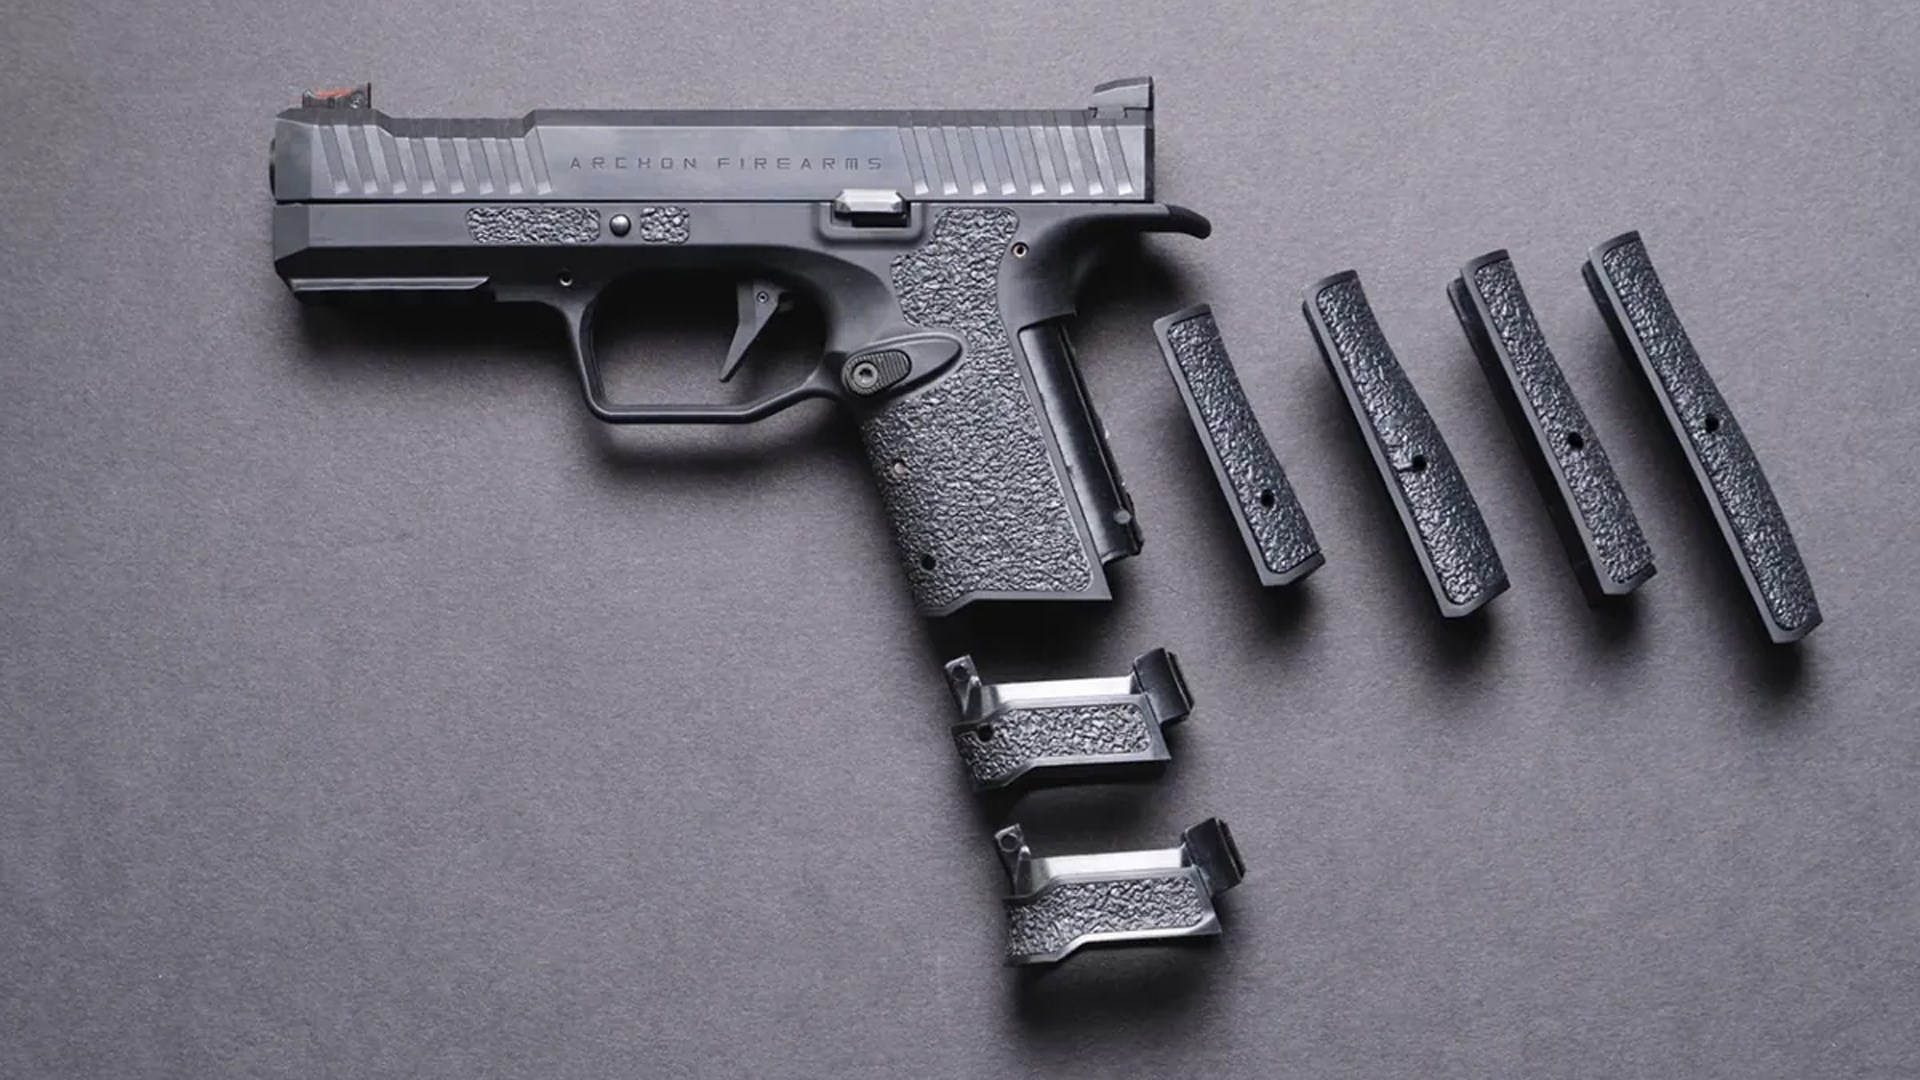 Archon Type B pistol shown with magazine well inserts and interchangeable backstraps.